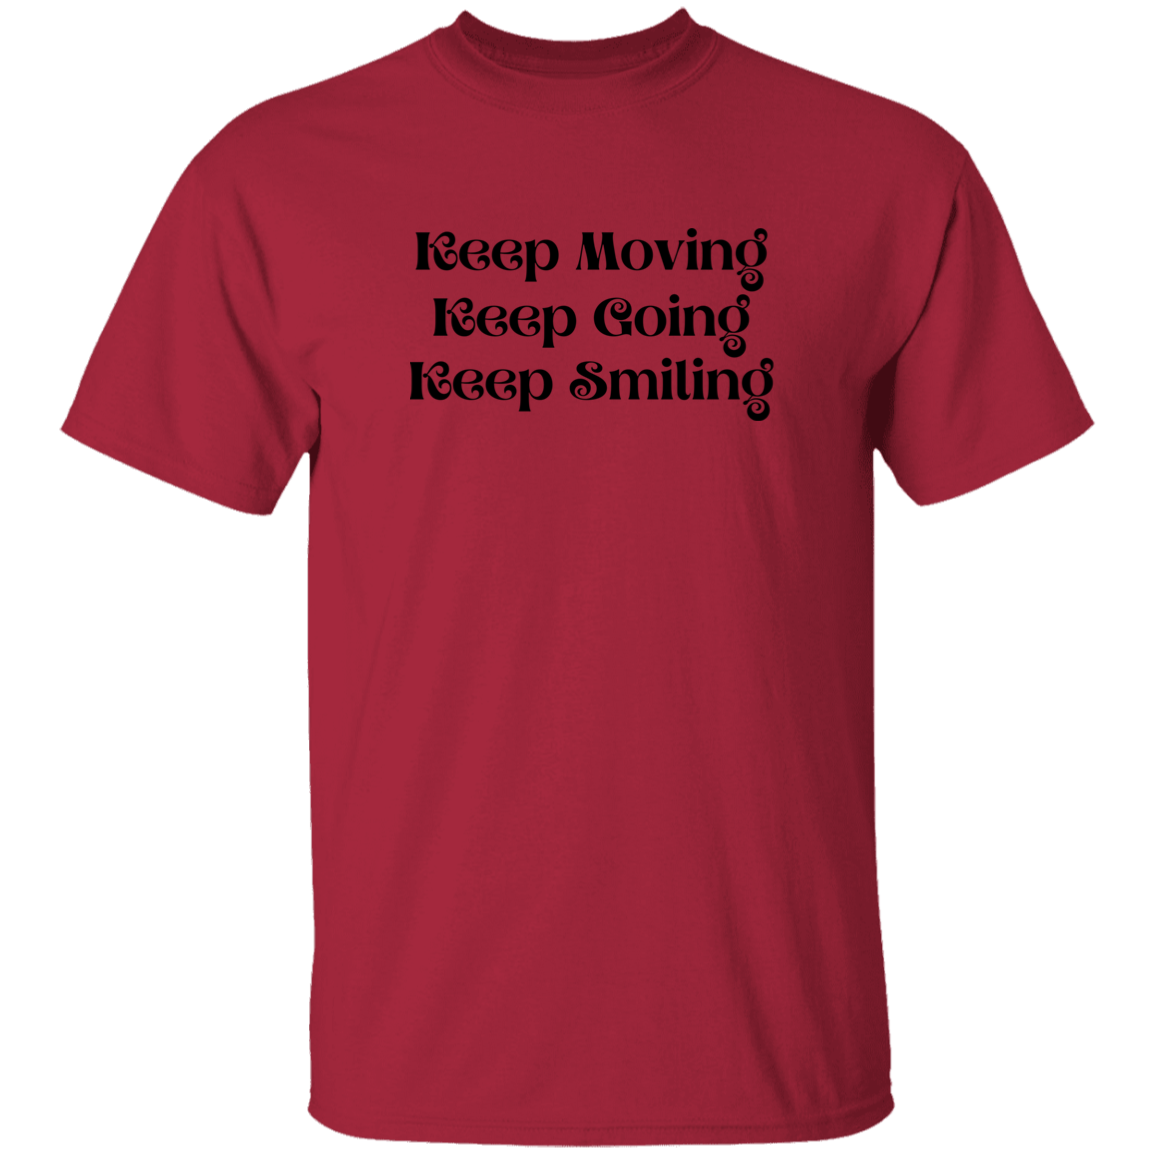 Keep Moving/Going/Smiling - T-Shirt